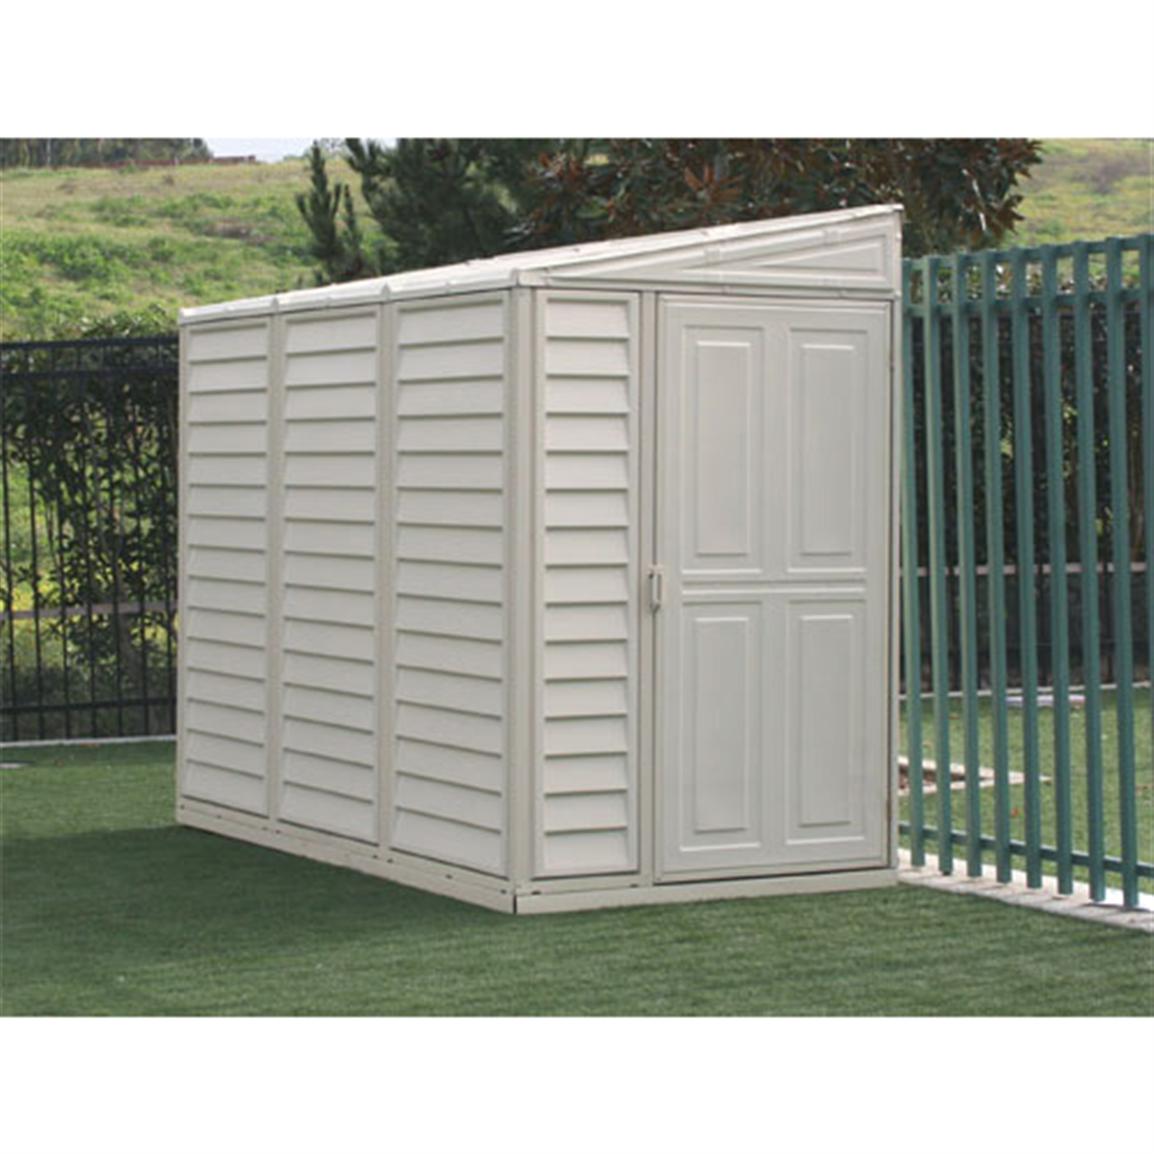 DuraMaxÂ® 4x8' SideMate Vinyl Shed with Foundation - 130900 